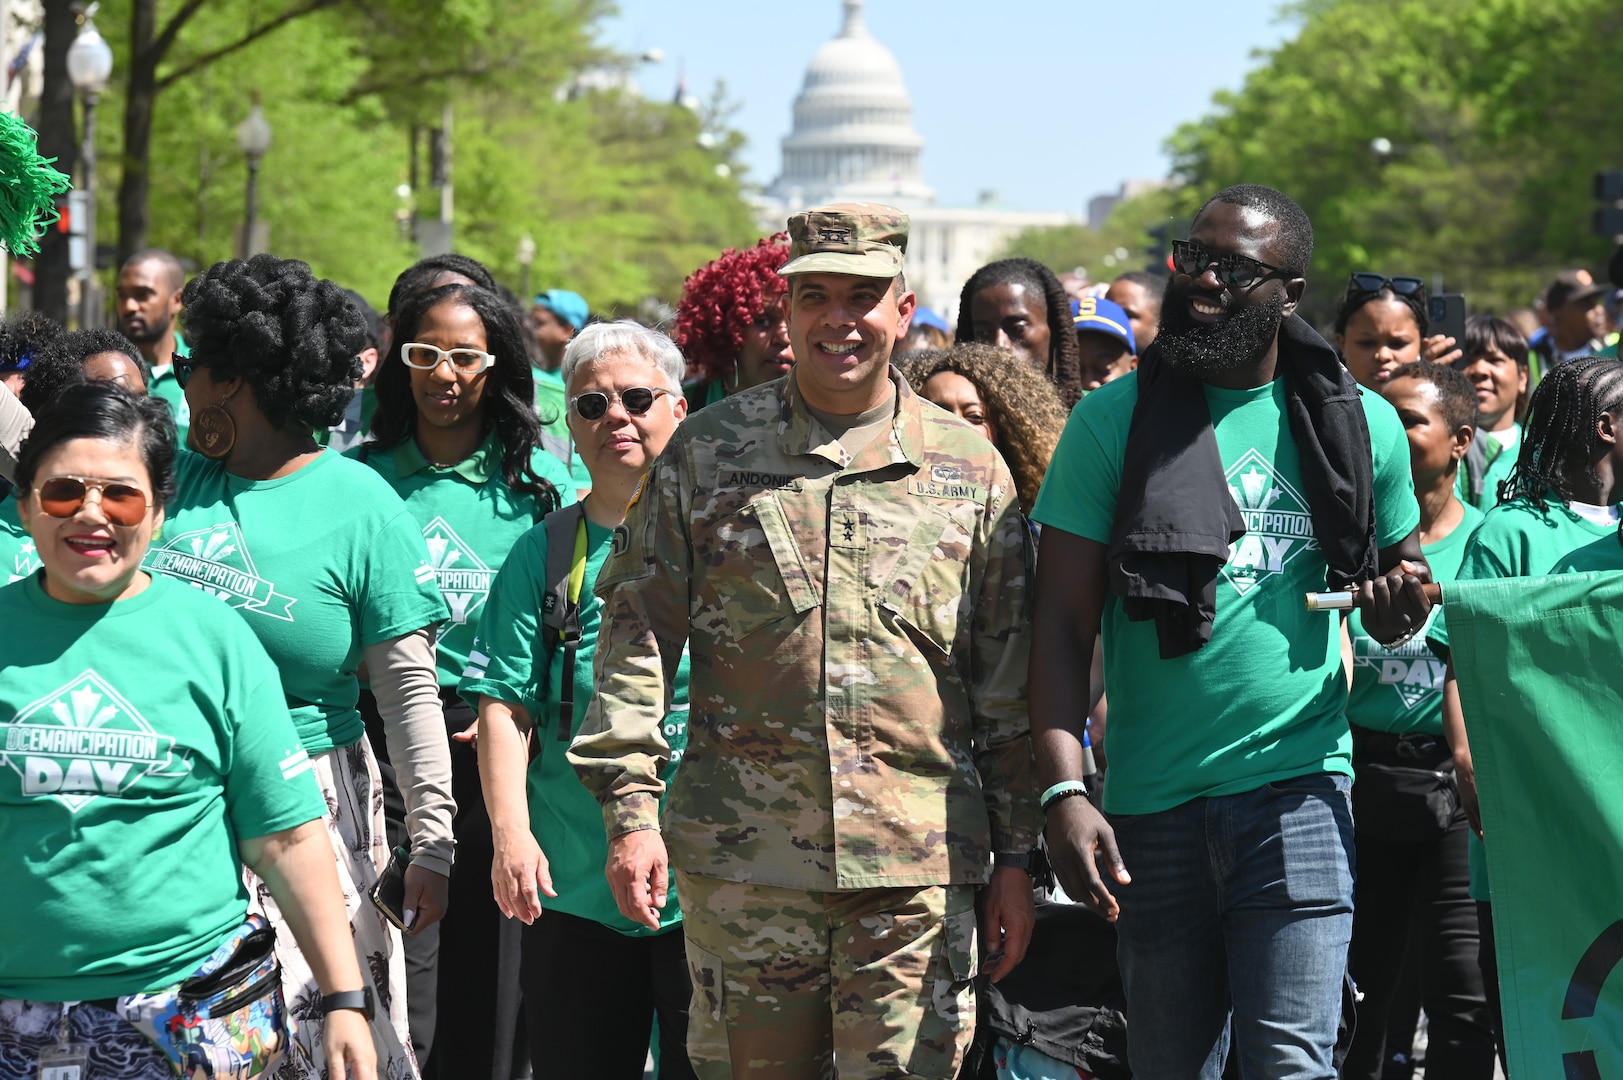 Maj. Gen. John C. Andonie, Commanding General (interim), D.C. National Guard, and the 257th Army Band joined Mayor Muriel Bowser for the 2024 Emancipation Day Parade and concert.  The event which commemorates the end of slavery is organized by the Mayor's Office of Community Affairs (MOCA).  On April 16, 1862, President Abraham Lincoln signed the District of Columbia Compensated Emancipation Act, ending slavery in the District of Columbia.  Passage of the law came over 8 months before President Lincoln issued his Emancipation Proclamation.